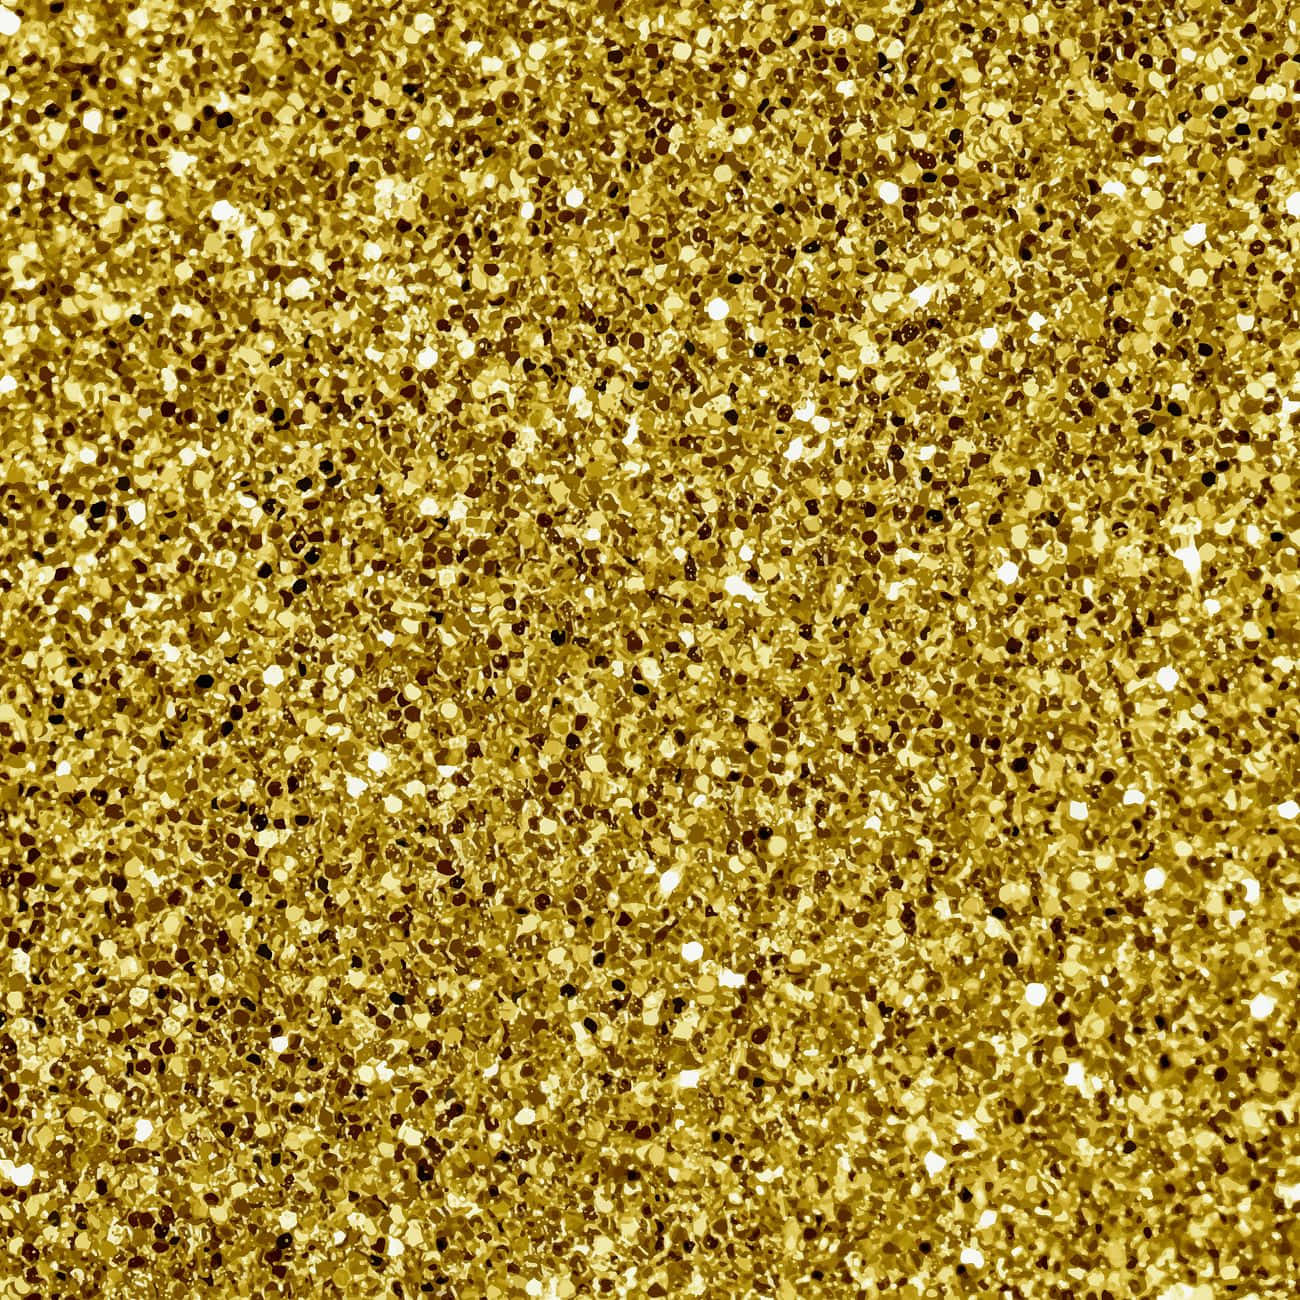 Make a statement with this bold and glamorous glittery background